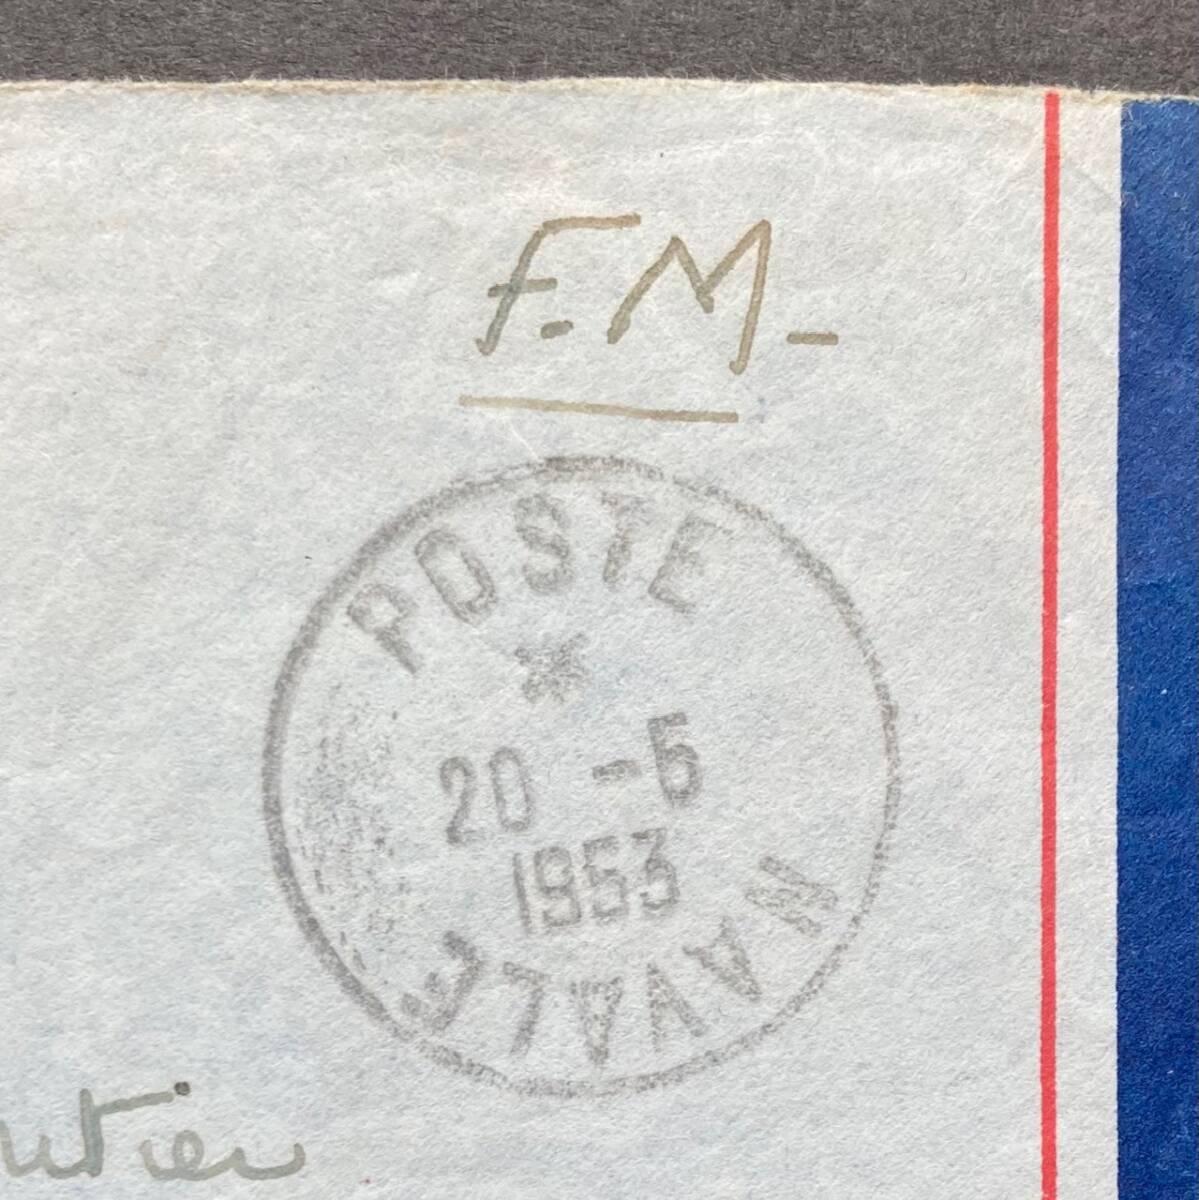 [ France *. seal dispatch navy ]1953 year India sina( rhinoceros gon navy basis ground ) dispatch navy free army . mail entire * navy . go in mail difference . approval seal pushed 